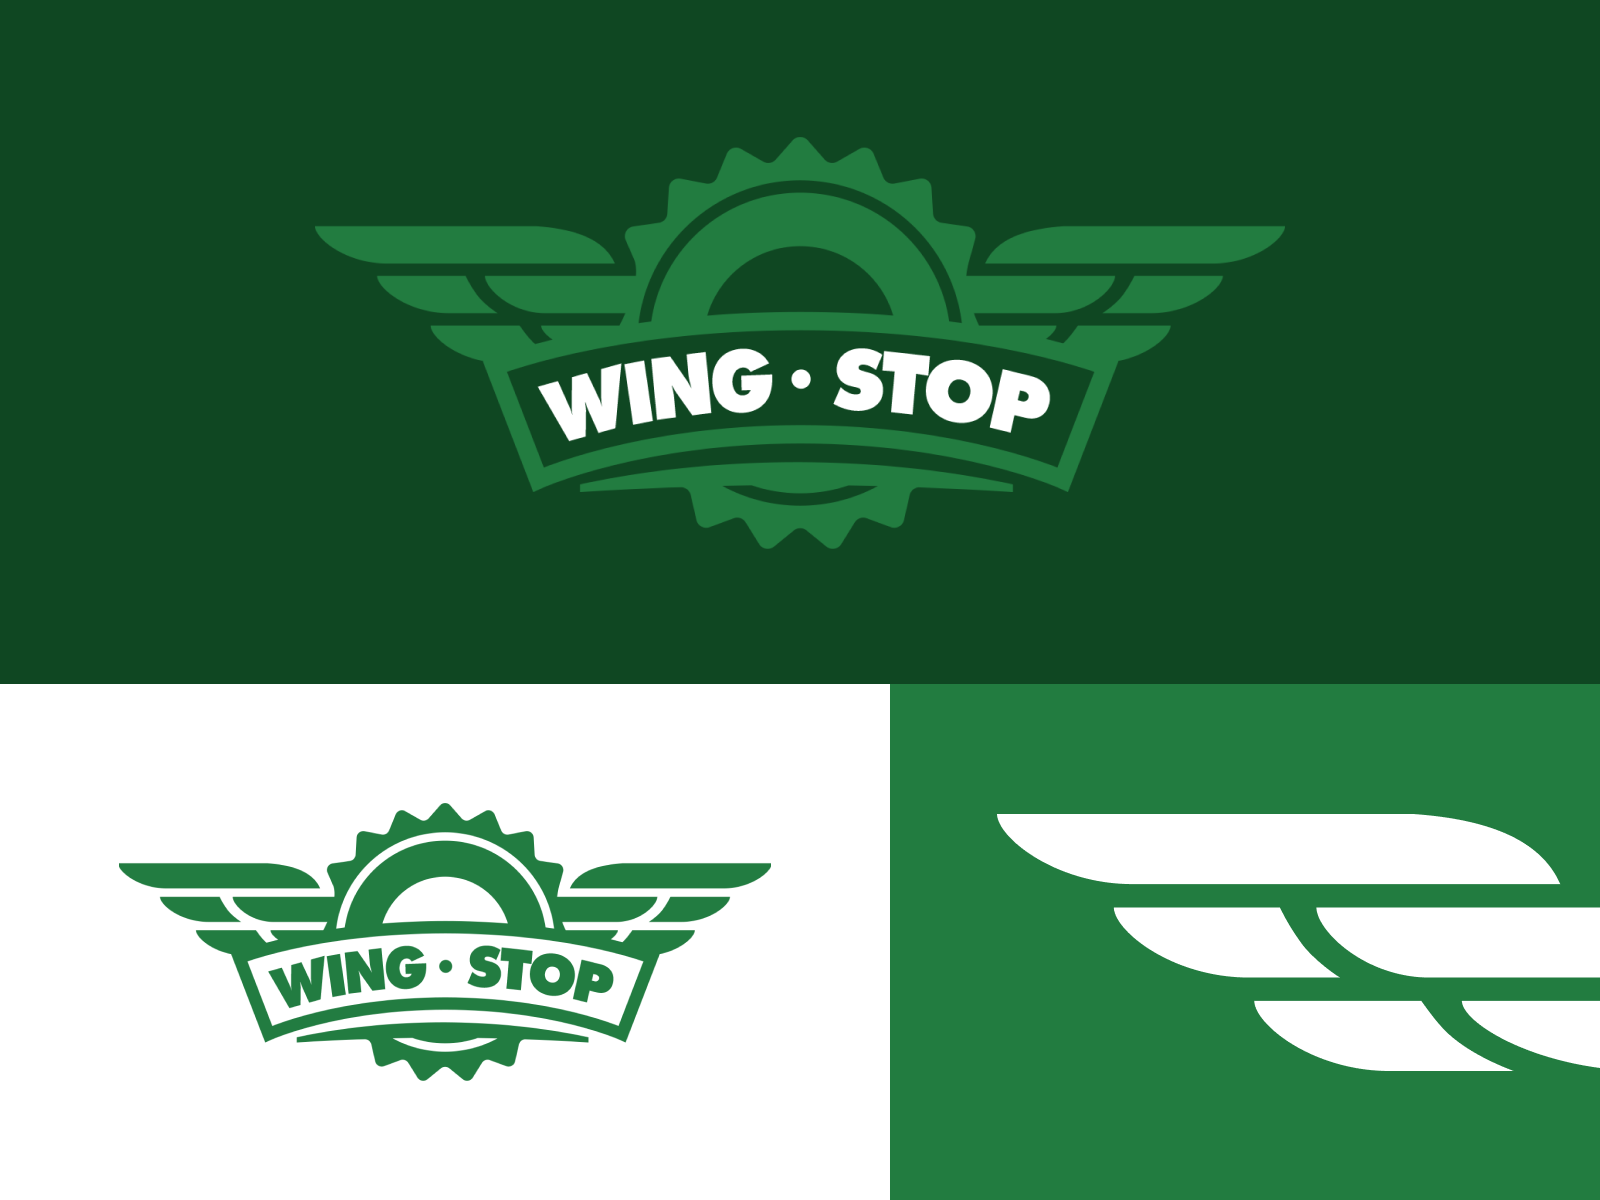 Wingstop Rebrand by Ronnie Johnson on Dribbble